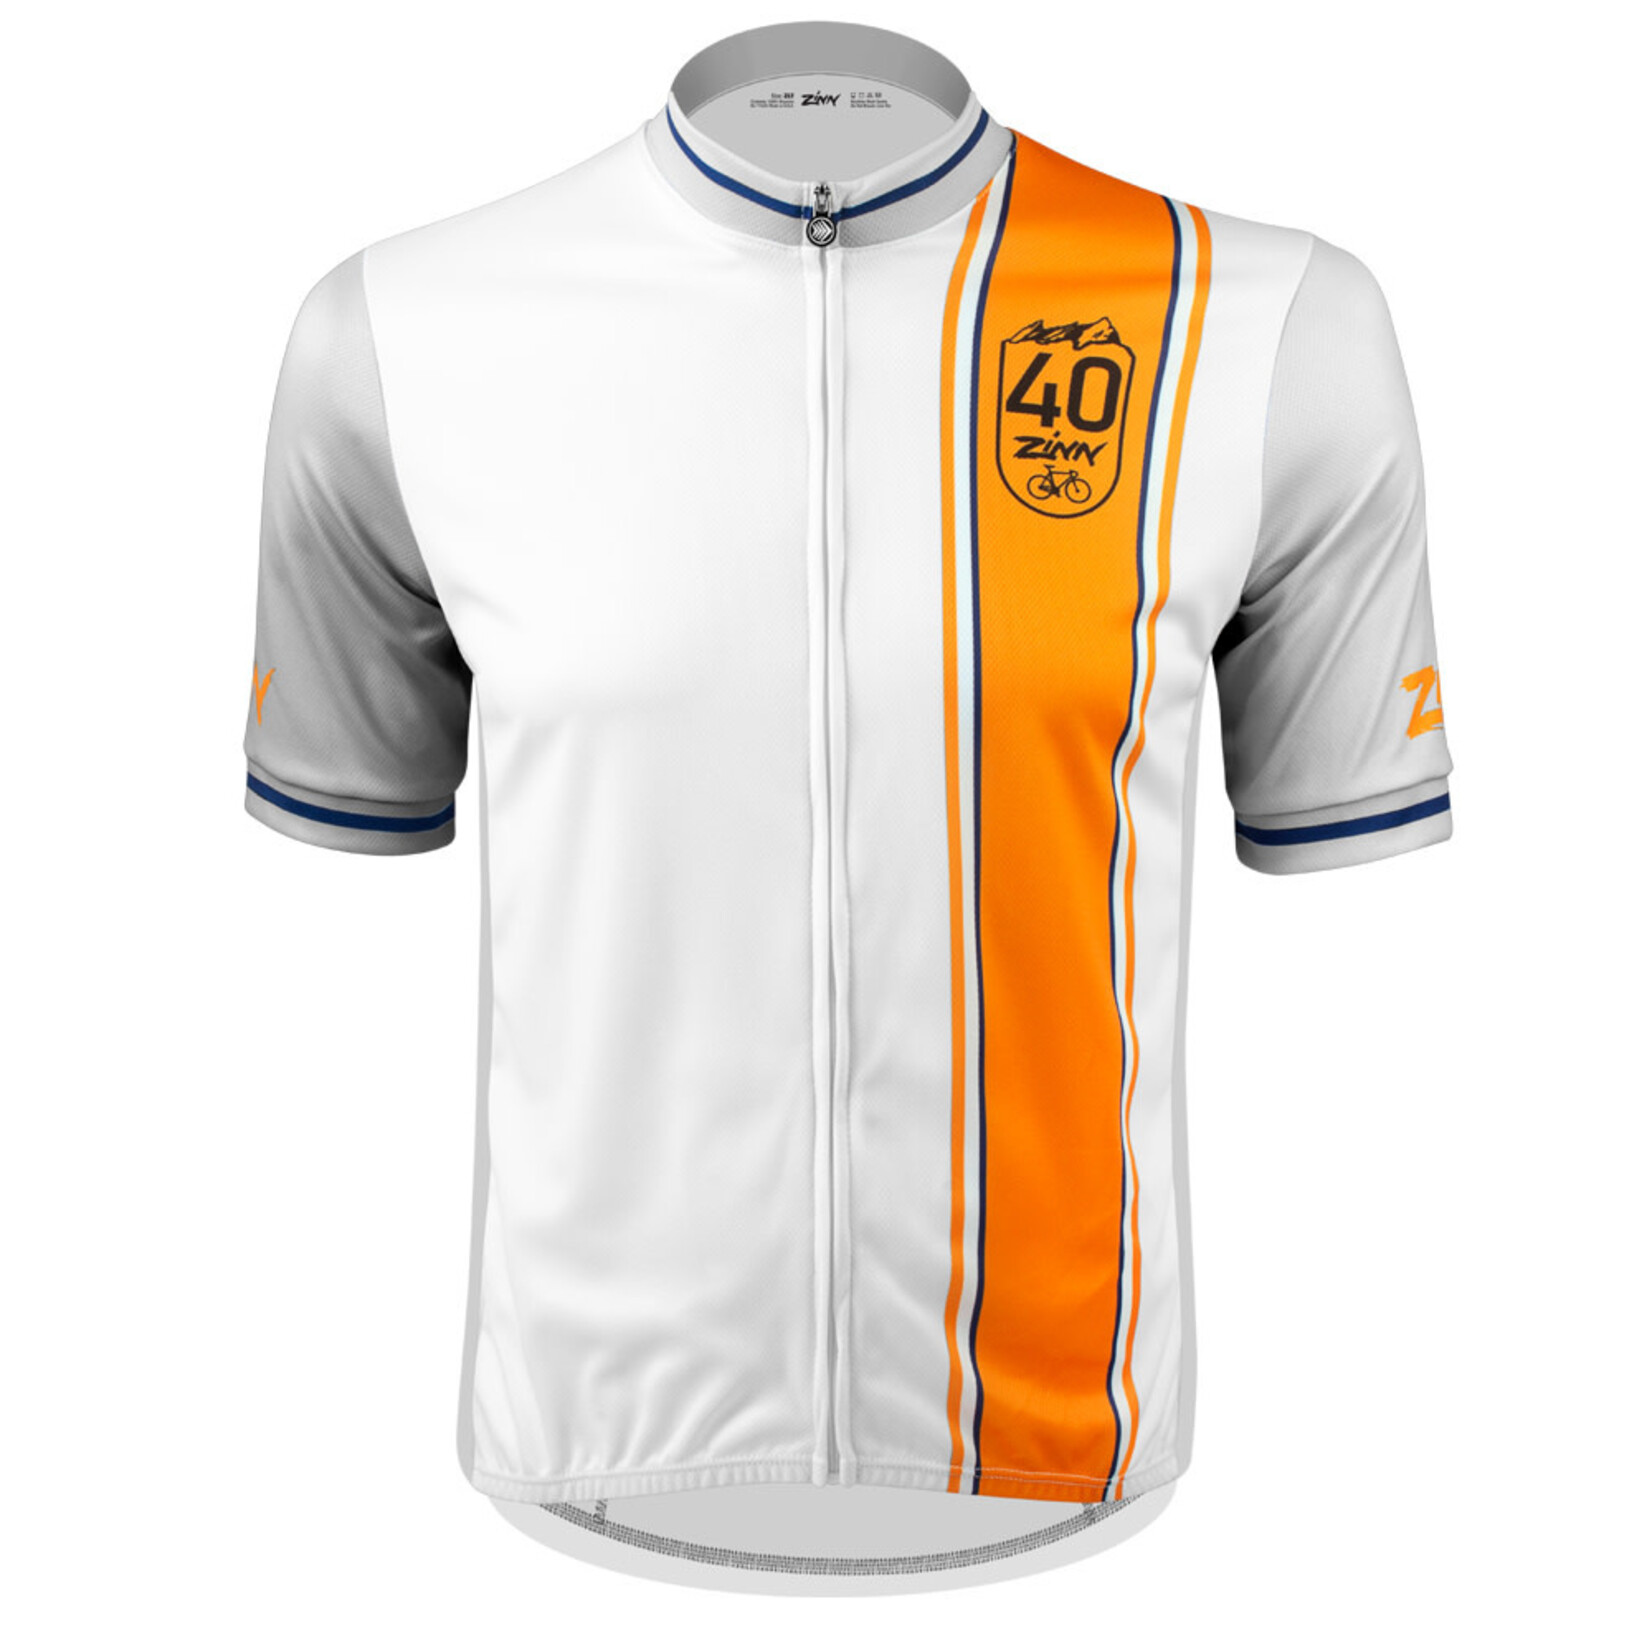 40th Anniversary - Big and Tall Shortsleeve jersey